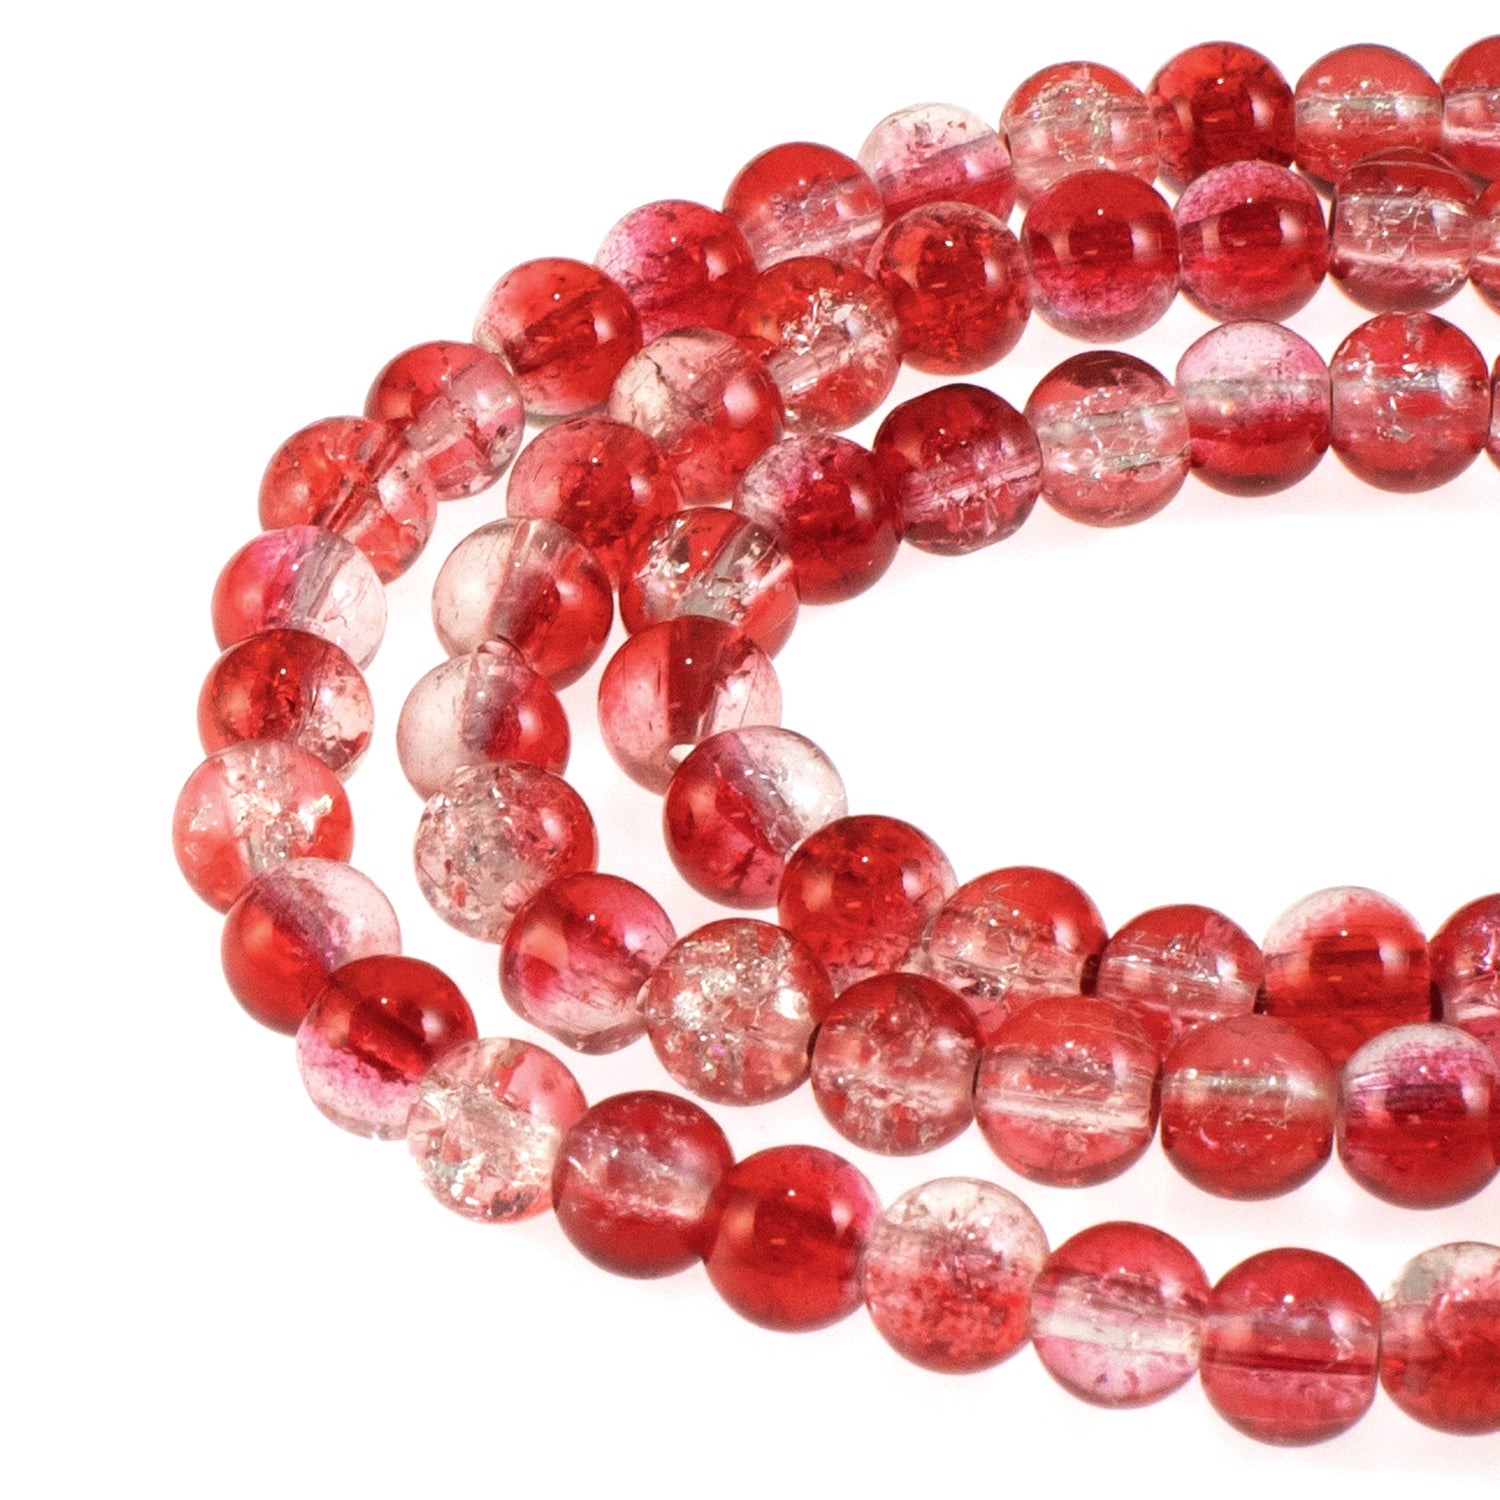 10mm Clear Round Glass Crackle Beads | Hackberry Creek